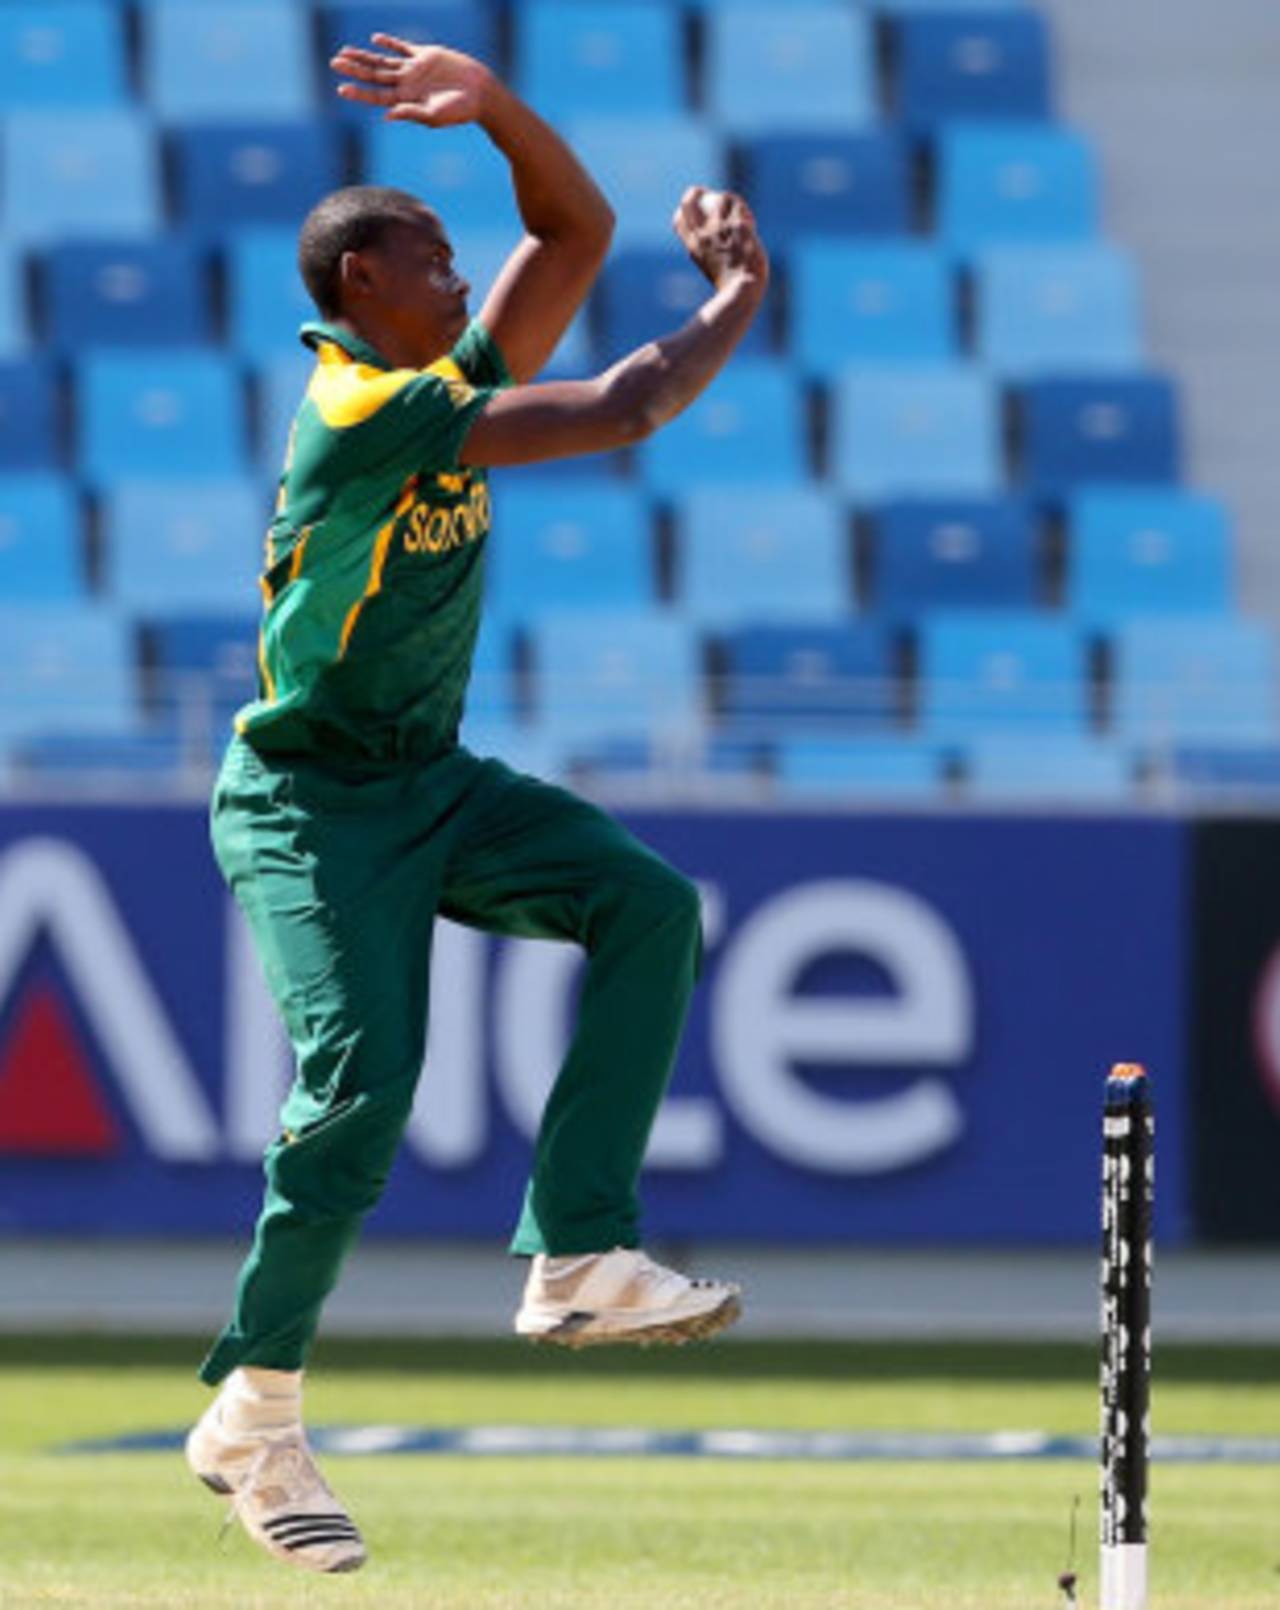 Kagiso Rabada hurled in deliveries at an average speed of 85mph, an impressive feat for an 18-year-old&nbsp;&nbsp;&bull;&nbsp;&nbsp;ICC